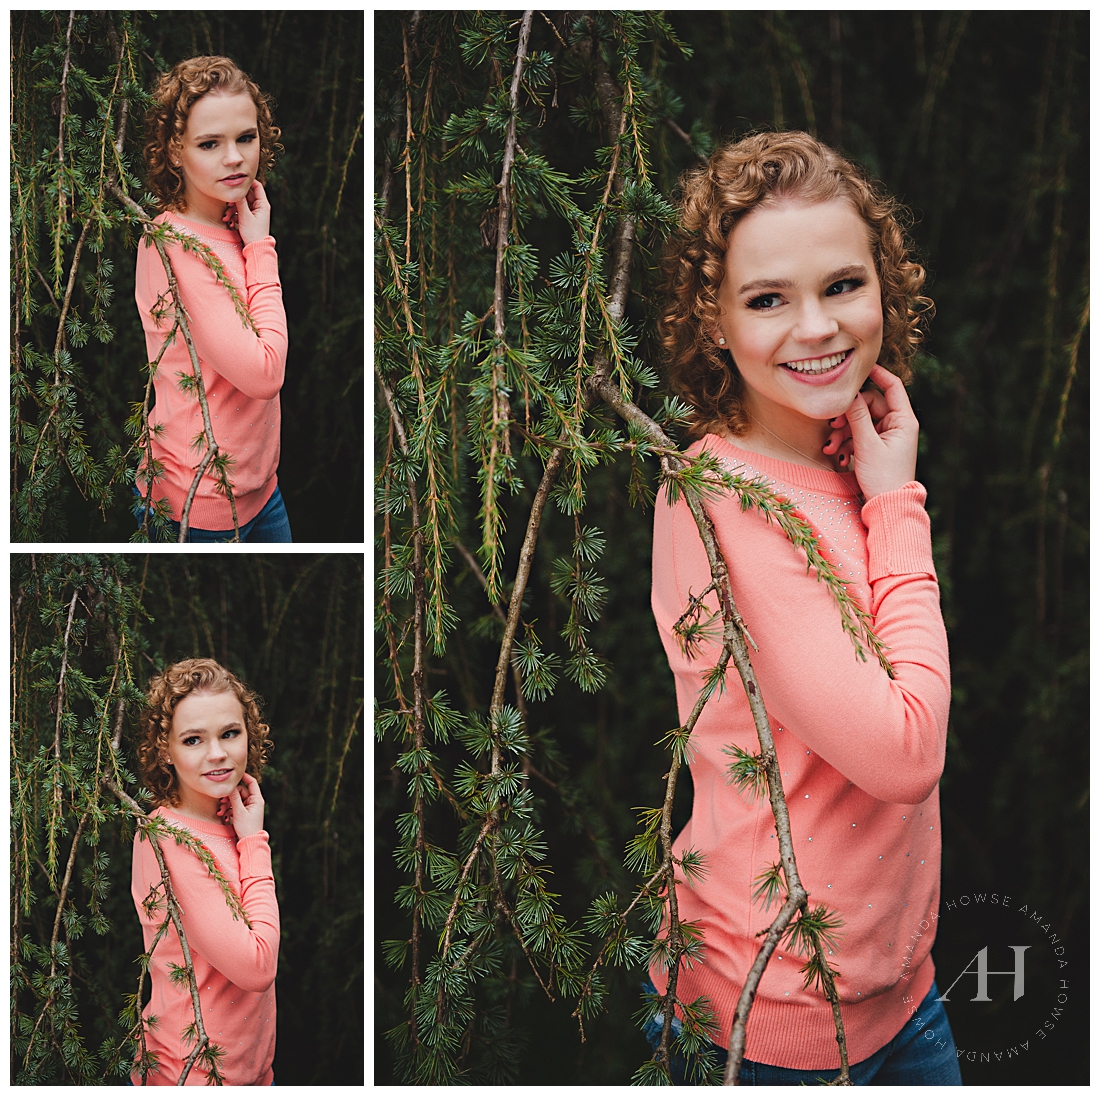 Outdoor PNW Senior Portraits | Wondering how to style an outdoor senior portrait session in the fall in Seattle? Check out Amanda Howse Photography for all the tips | Photographed by the Best Tacoma Senior Photographer Amanda Howse